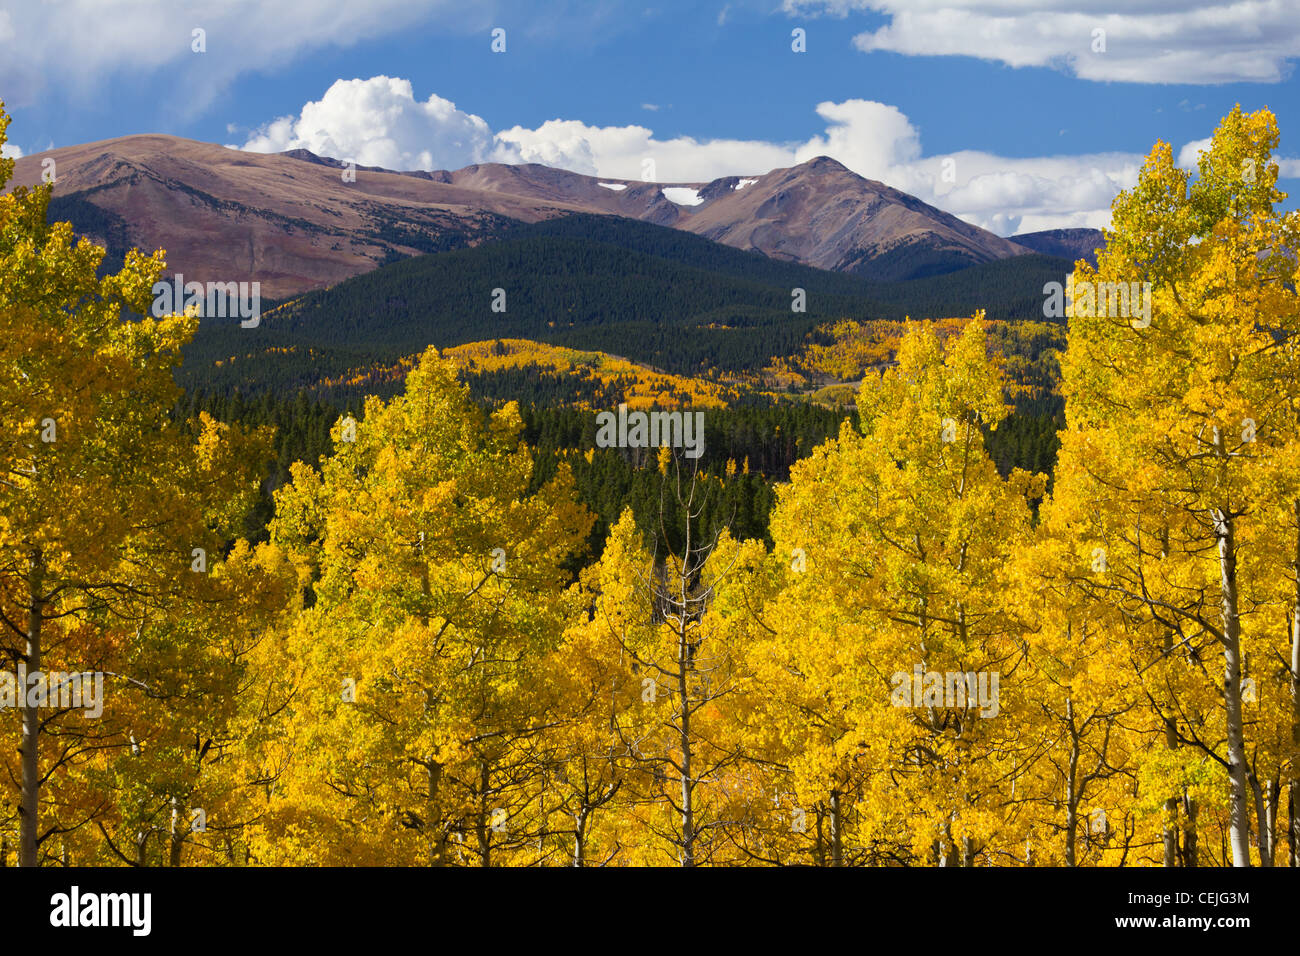 Landscape of the Colorado Rocky Mountains and golden aspen trees in Fall. Stock Photo